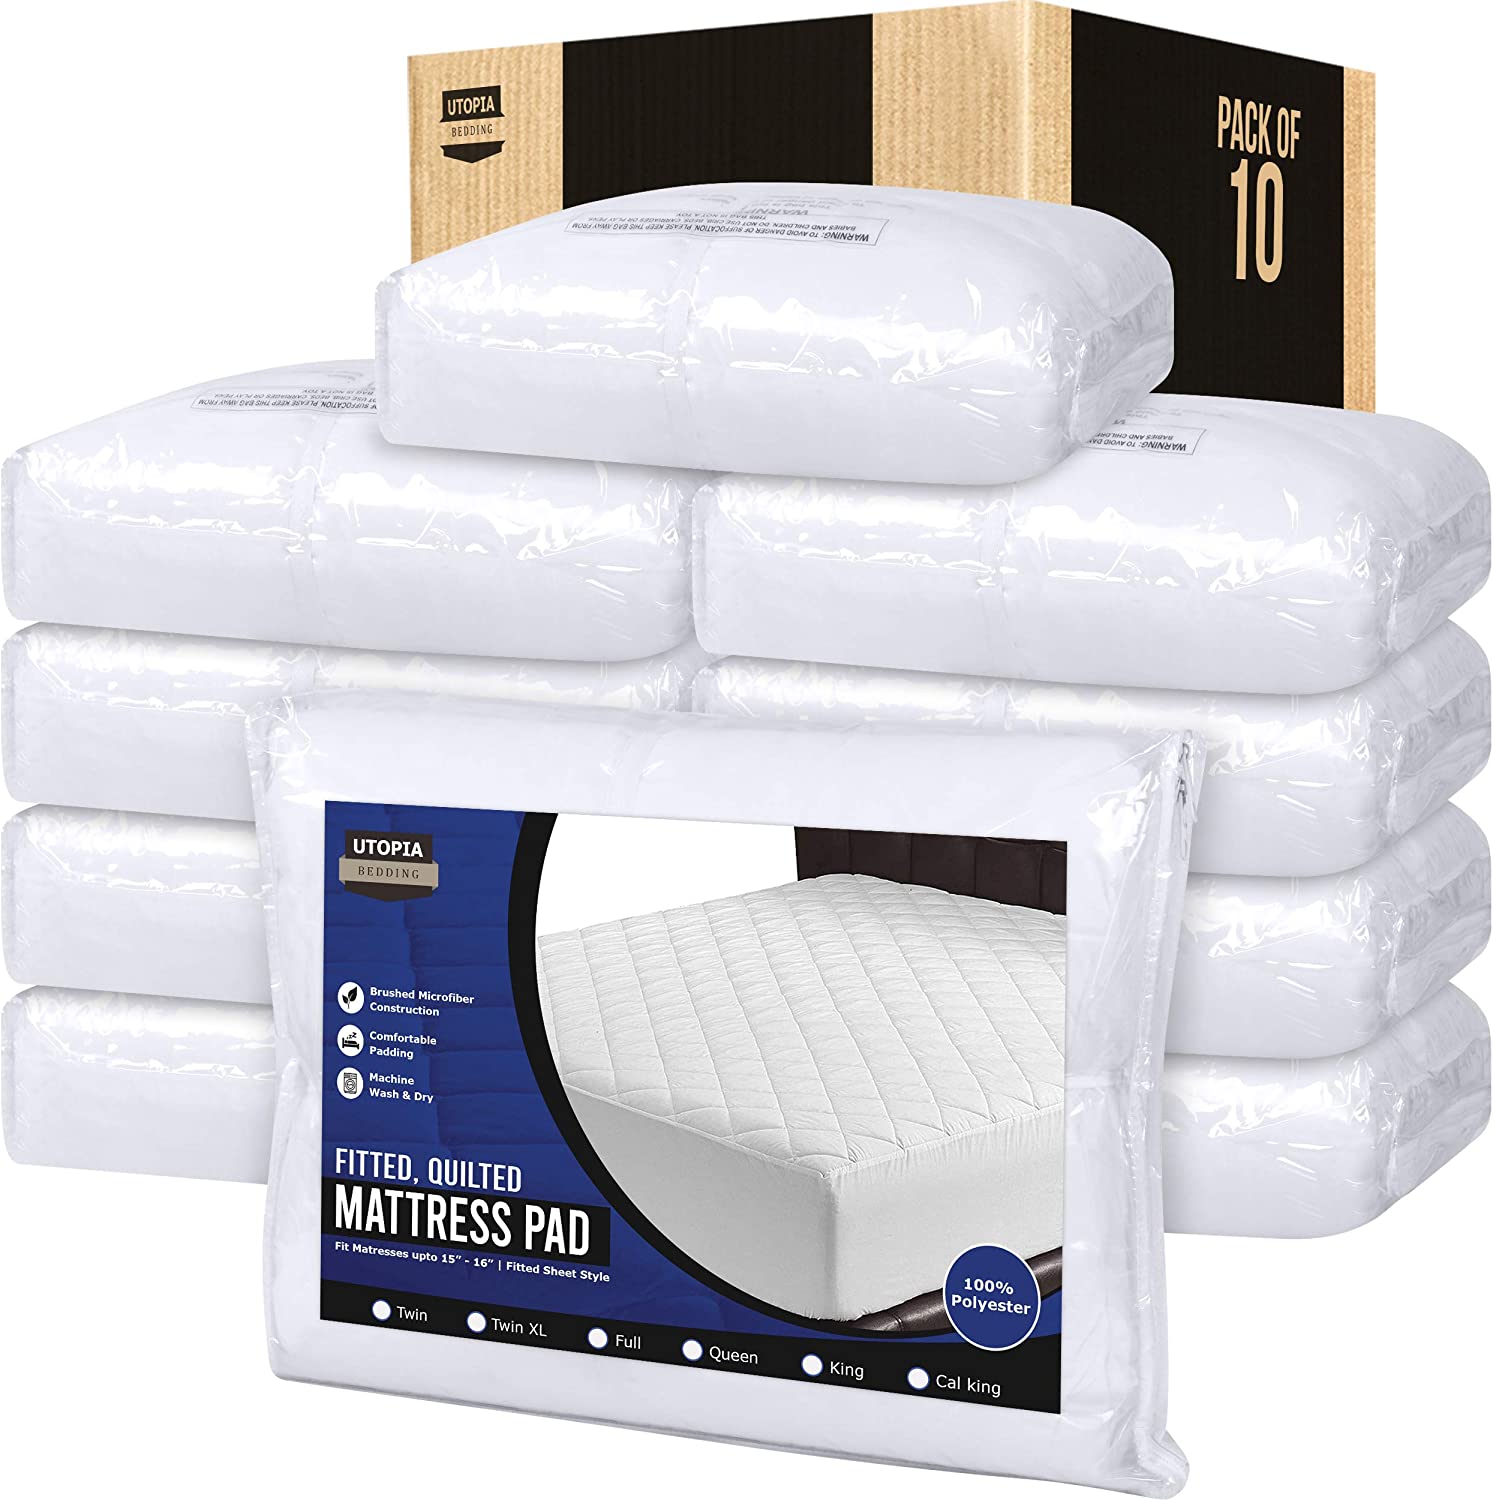 Utopia Bedding Mattress Pad Review 2019 - Worth It or Waste of Money?